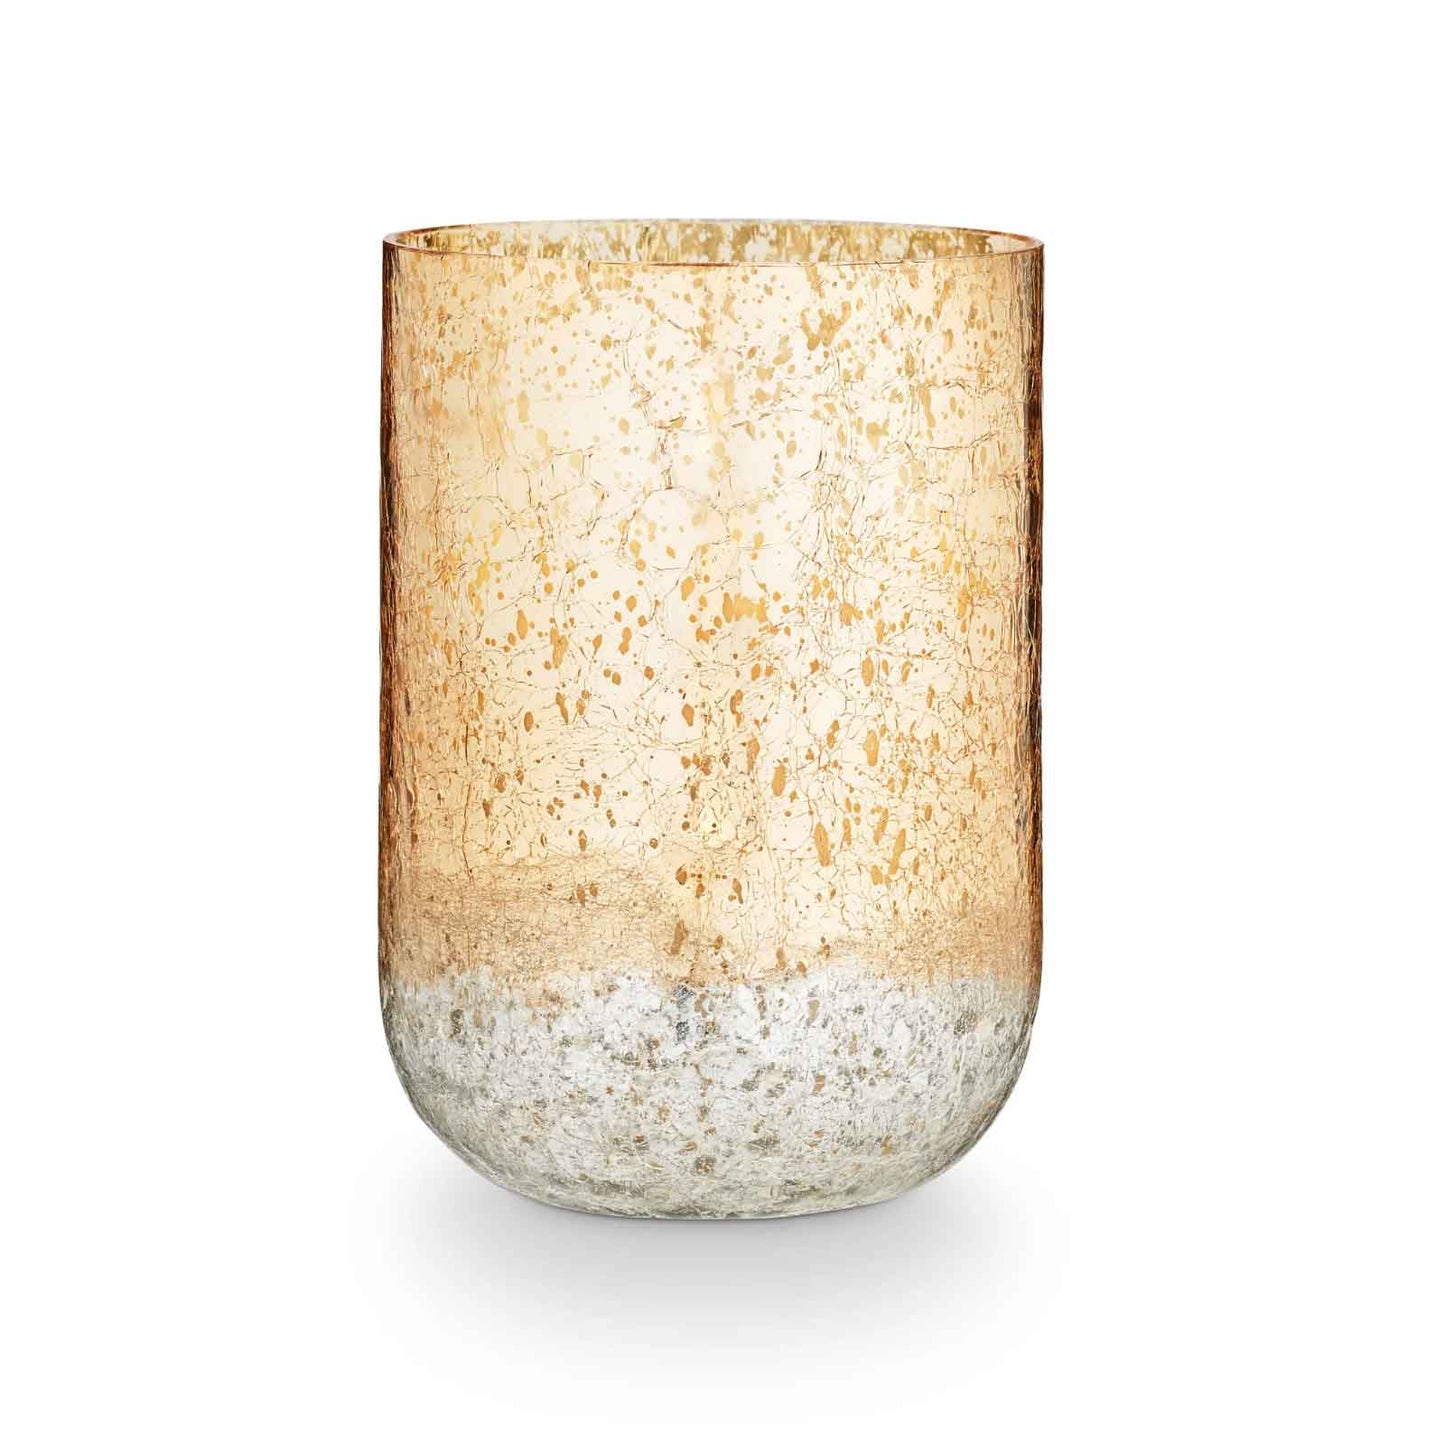 Winter White Large Radiant Glass Candle